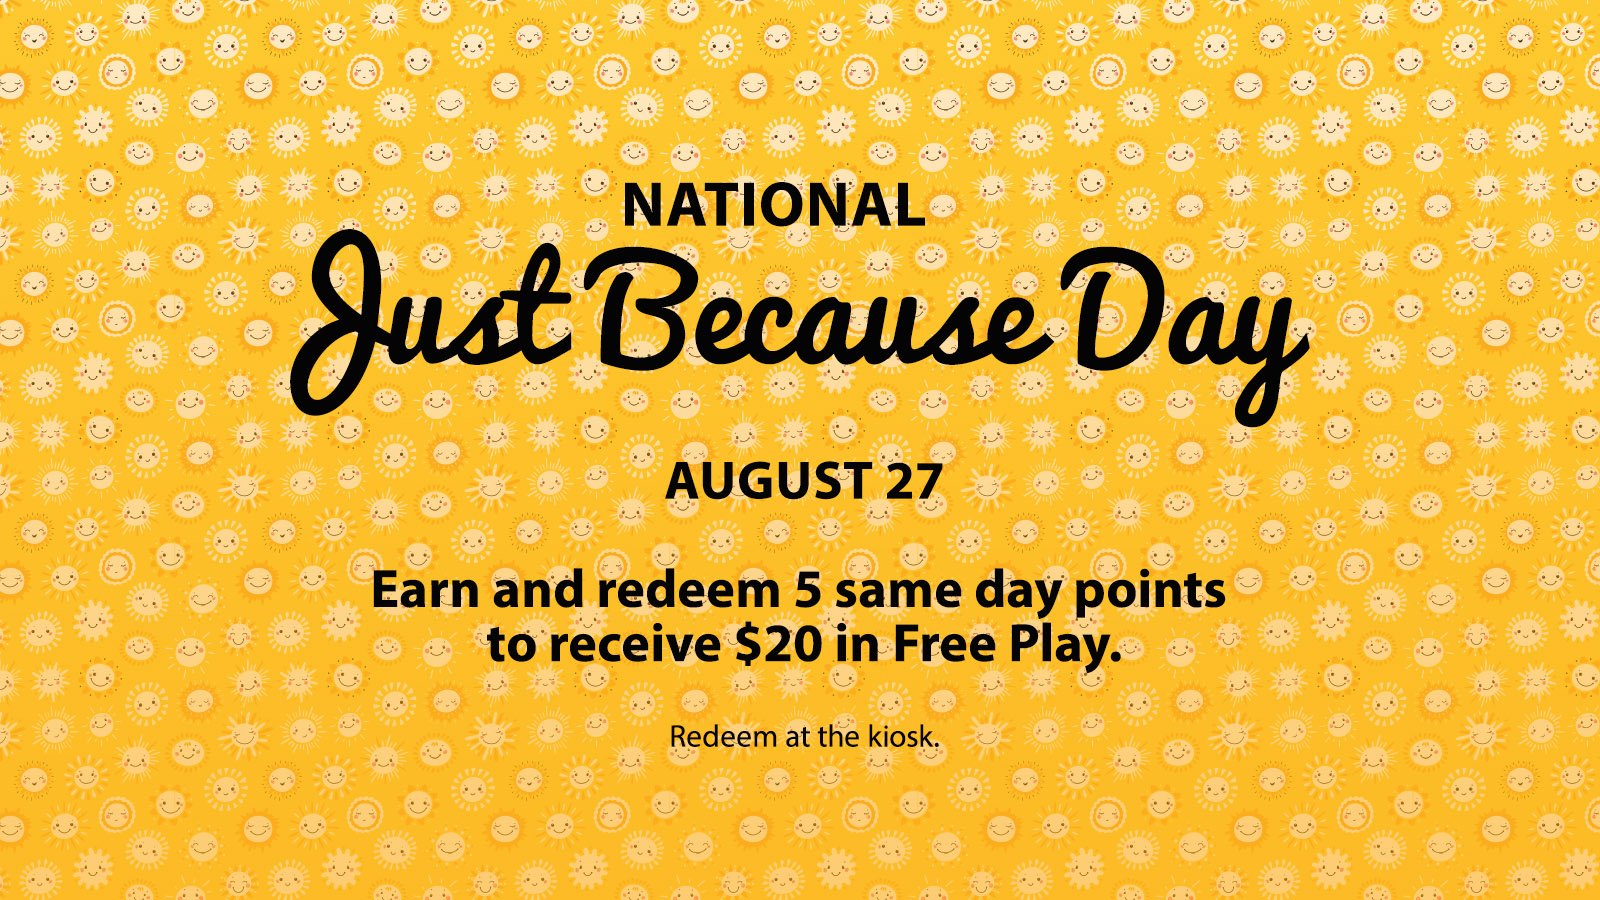 Get $20 in Free Play For Just 5 Same Day Points At Mole Lake Casino